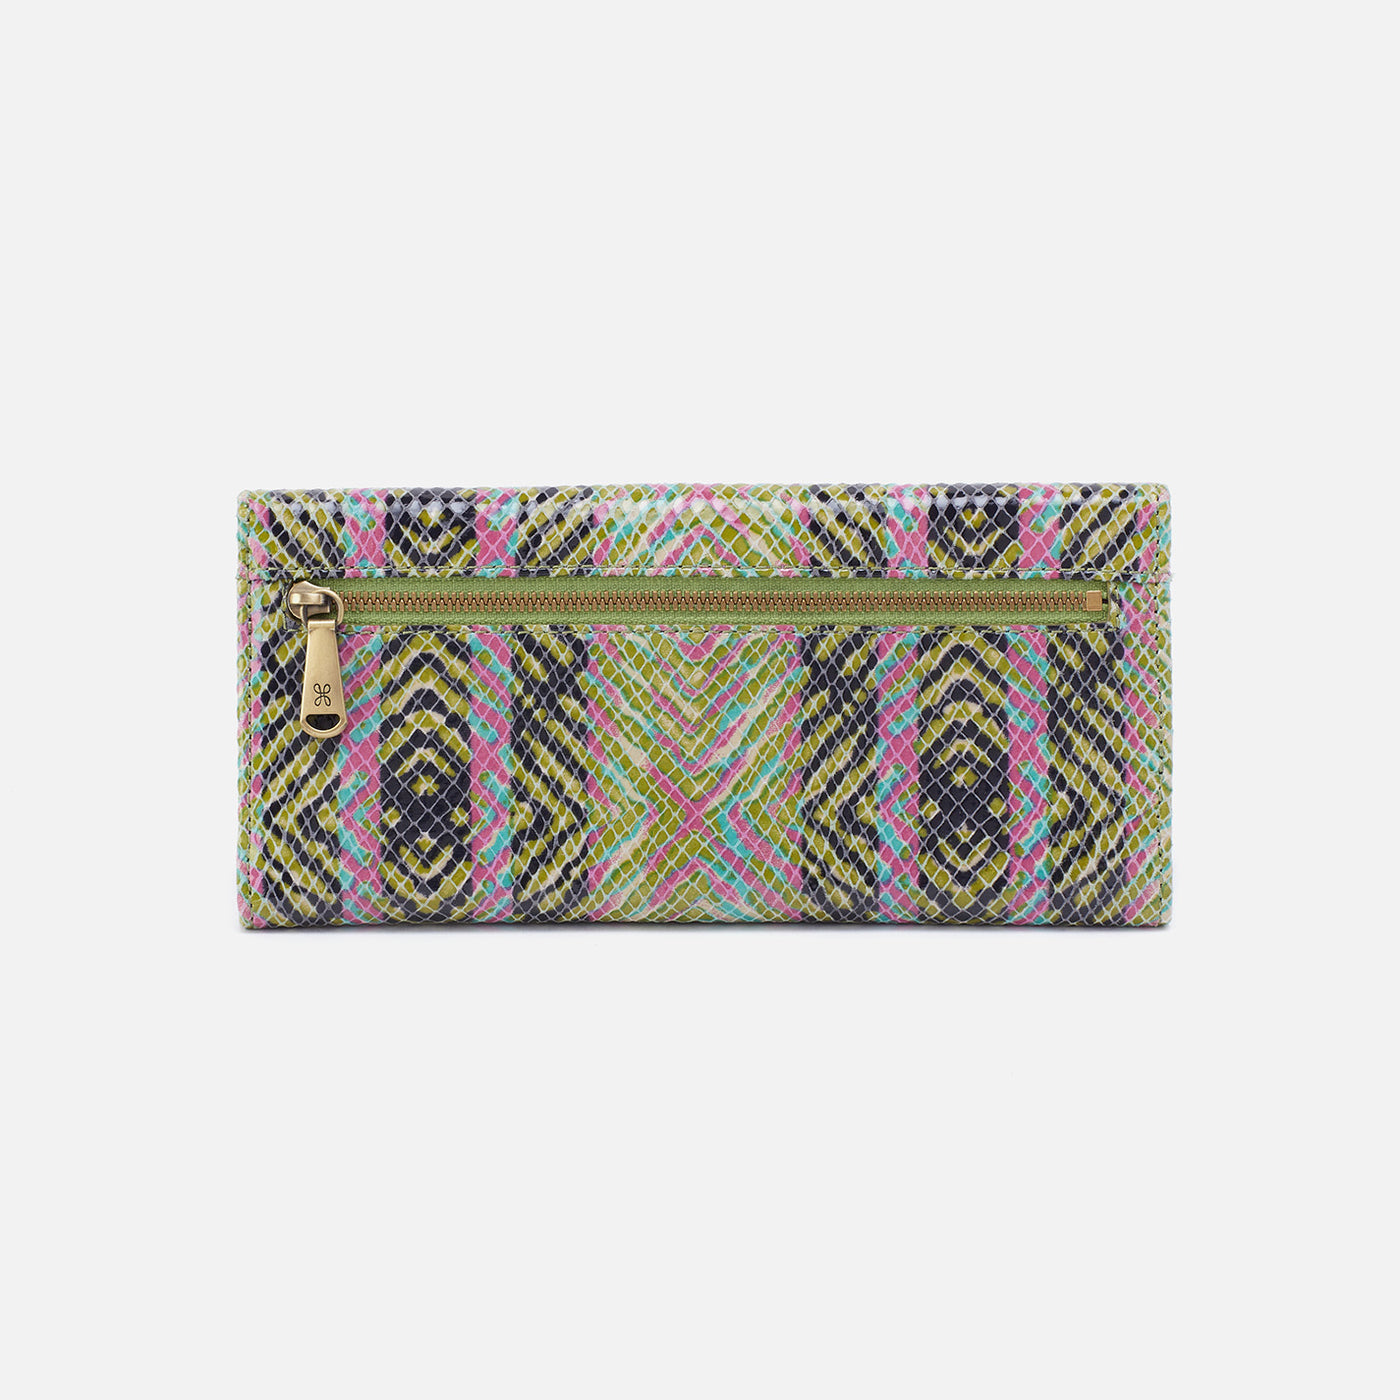 Jill Large Trifold Continental Wallet in Printed Leather - Geo Diamond Print